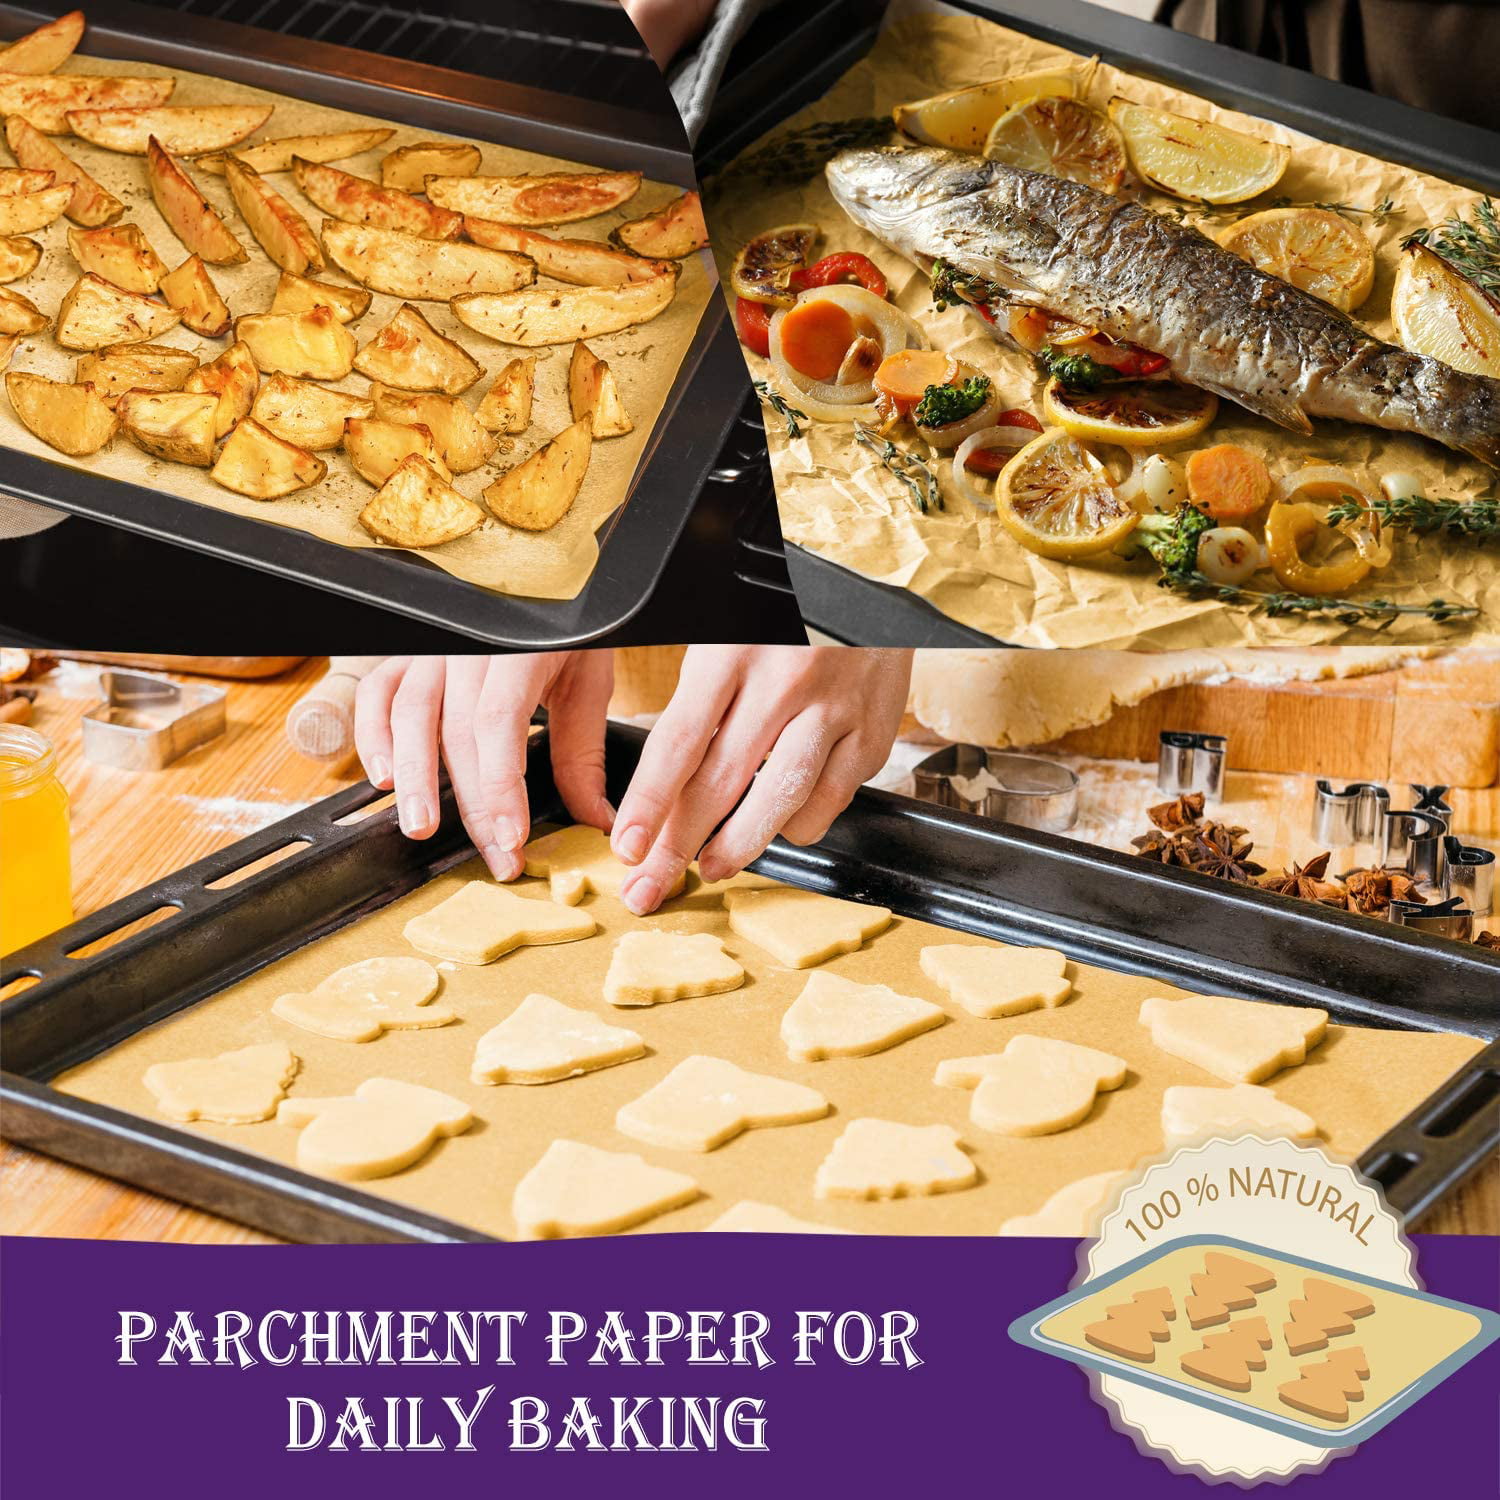 [16 x 24 Inch] Precut Baking Parchment Paper Sheets Unbleached Non-Stick  Sheets for Baking & Cooking - Kraft…